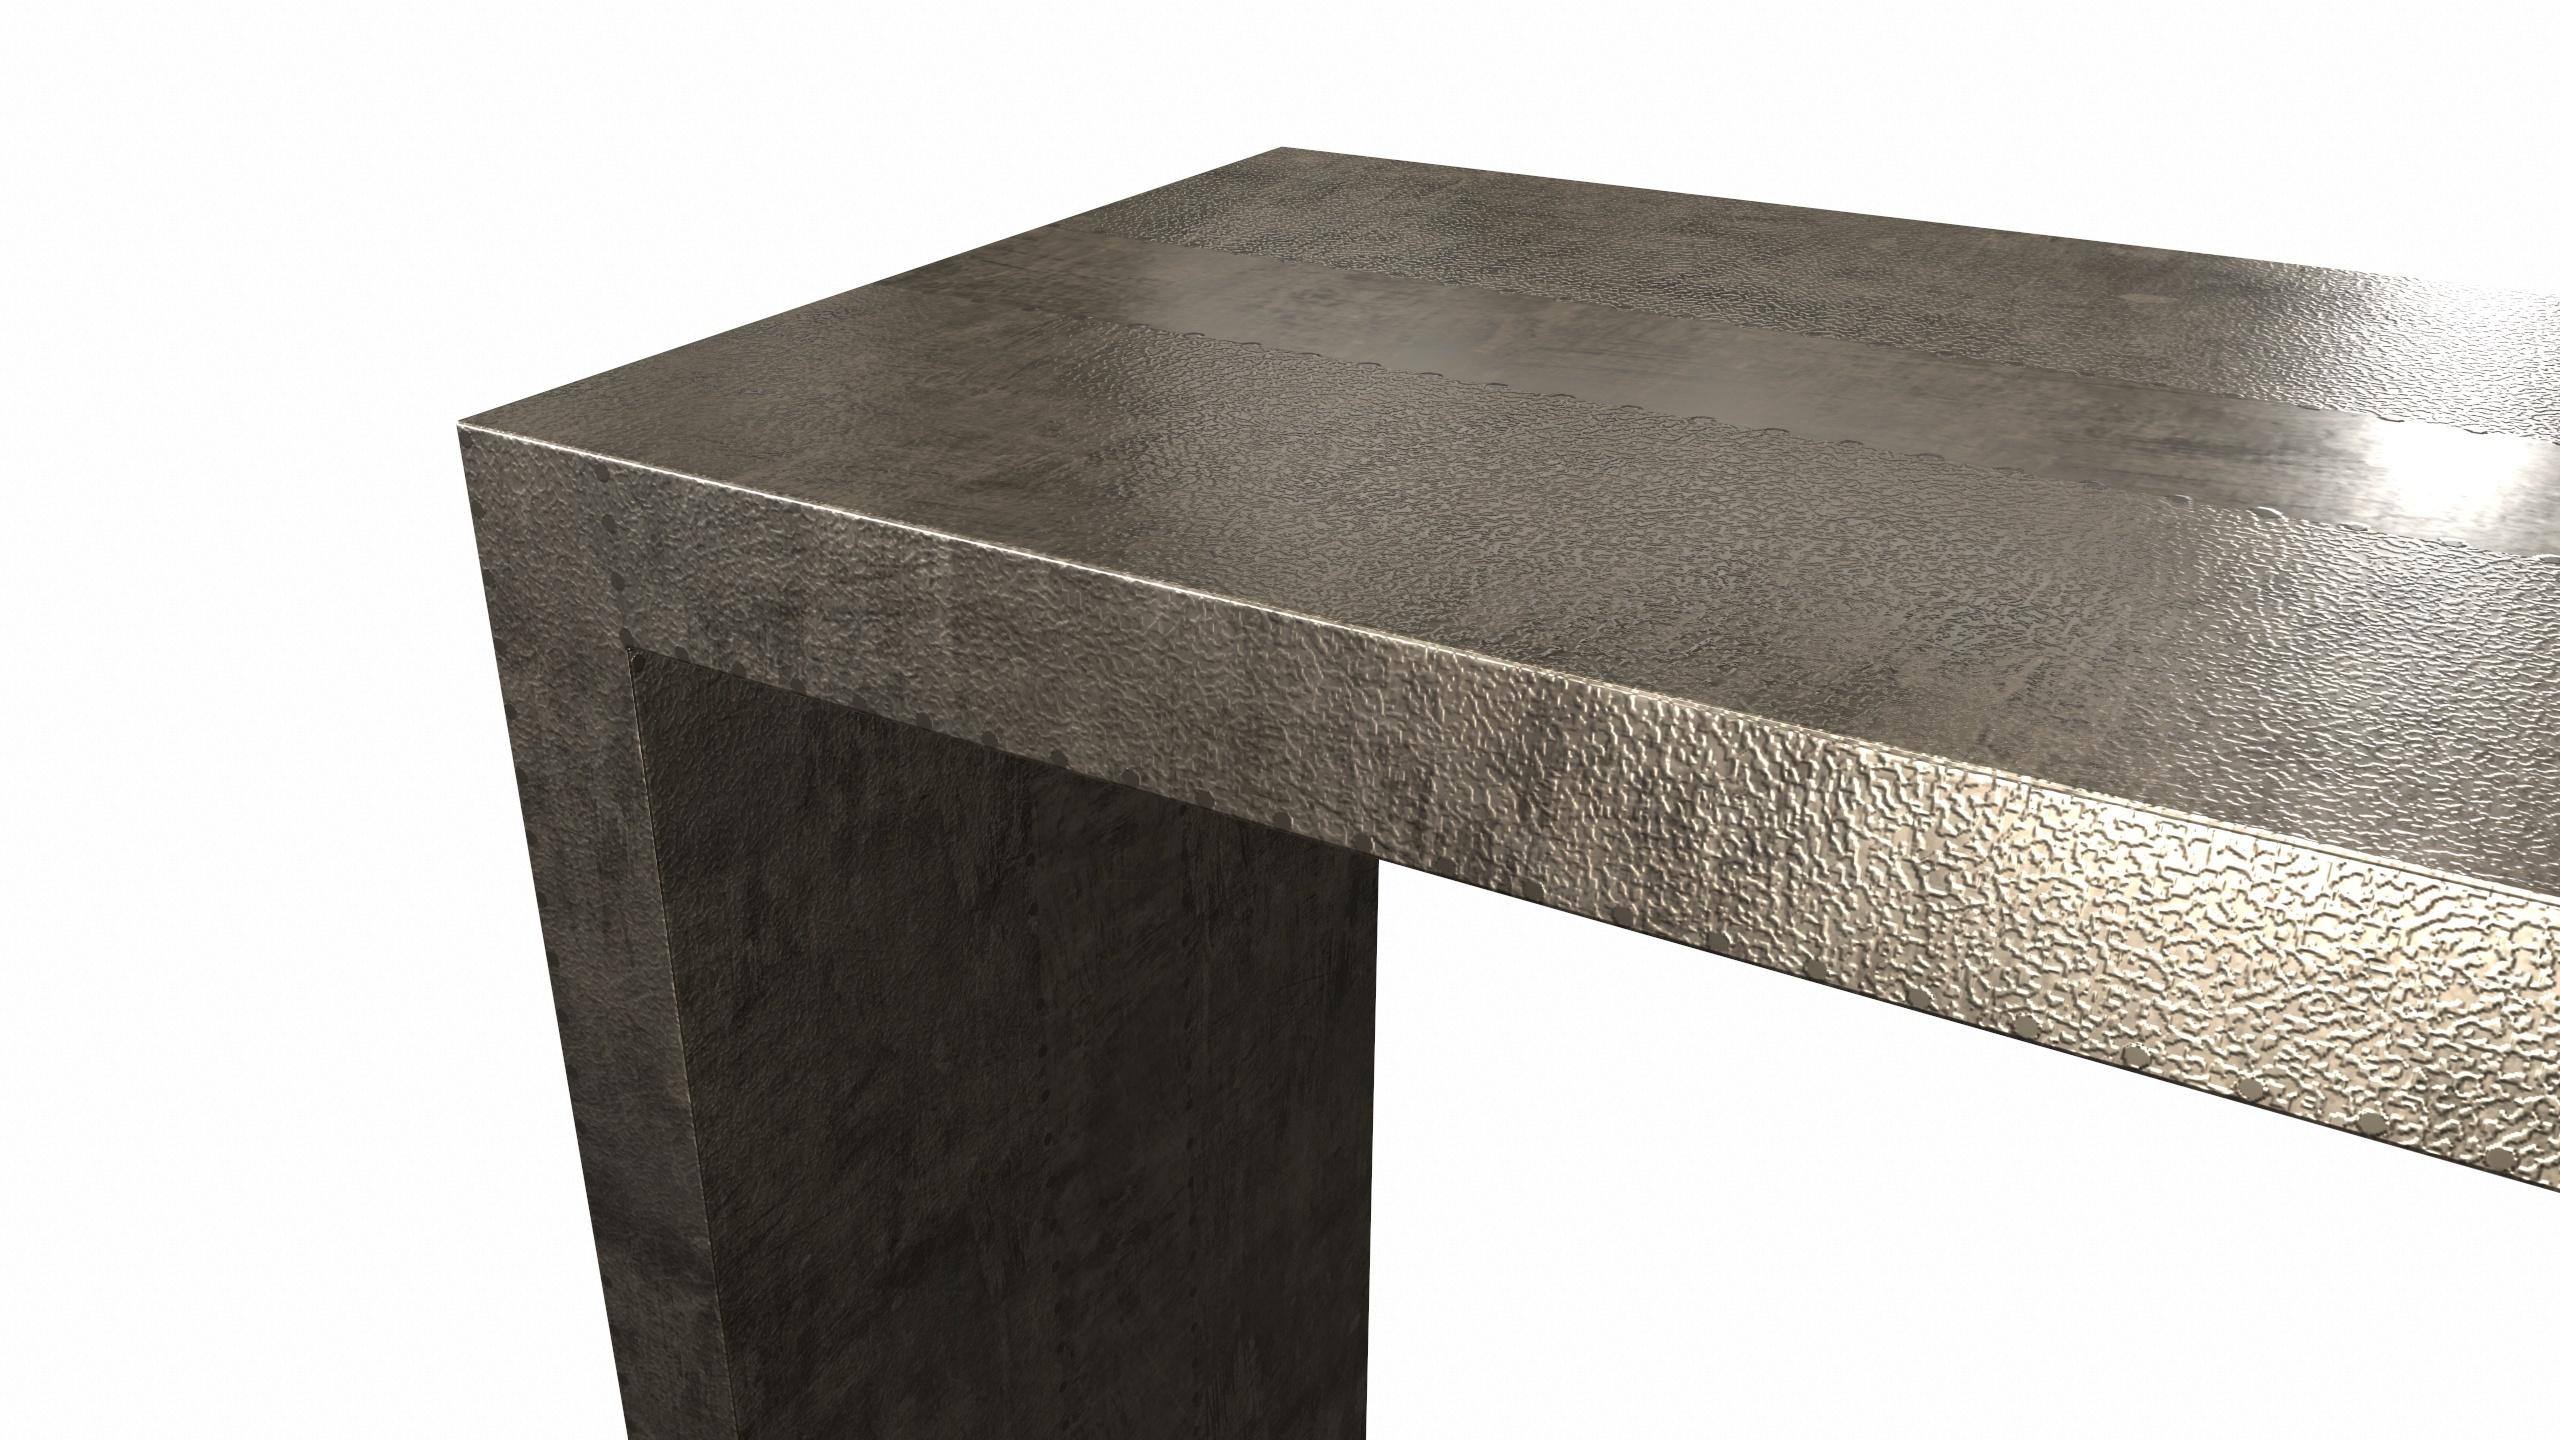 Other art deco Conference Console Tables Antique Bronze Fine Hammered by Alison Spear For Sale